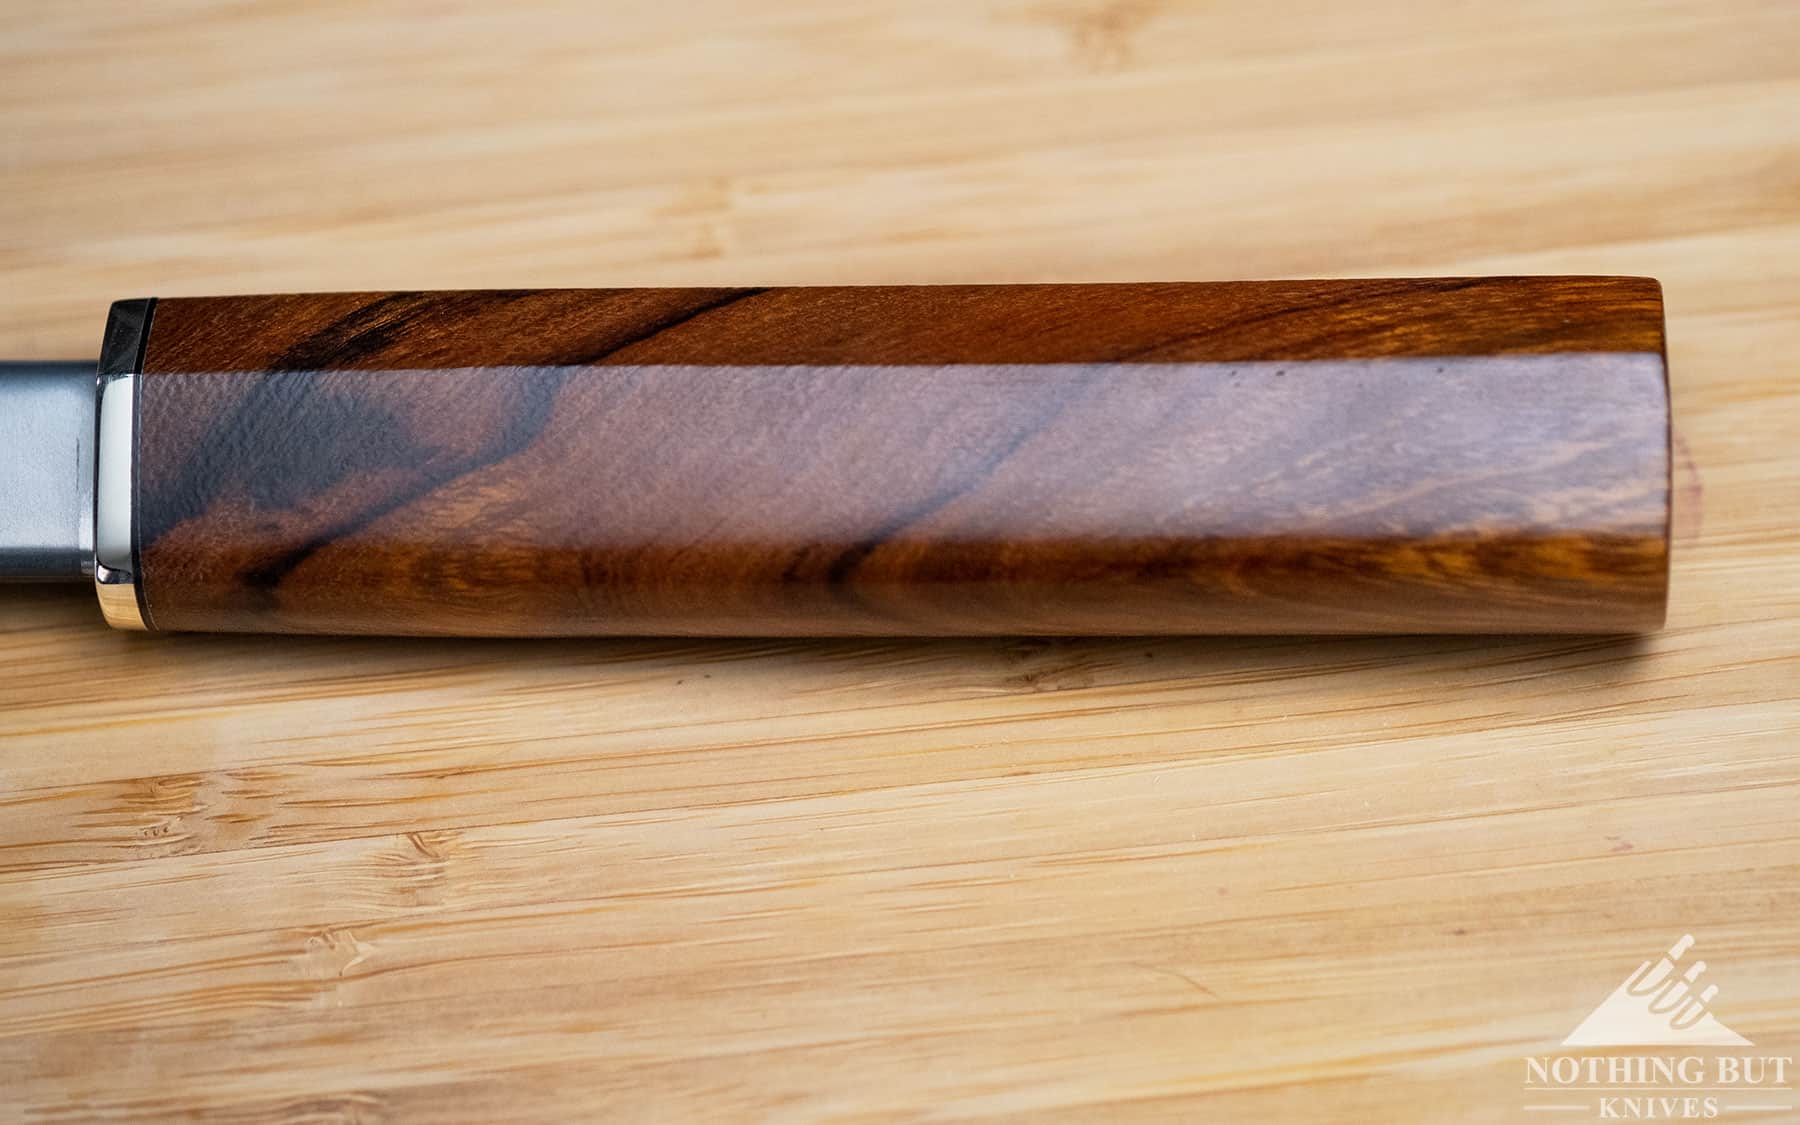 A close-up of the XinCraft 8.4 inch chef knife handle to chow its shape.